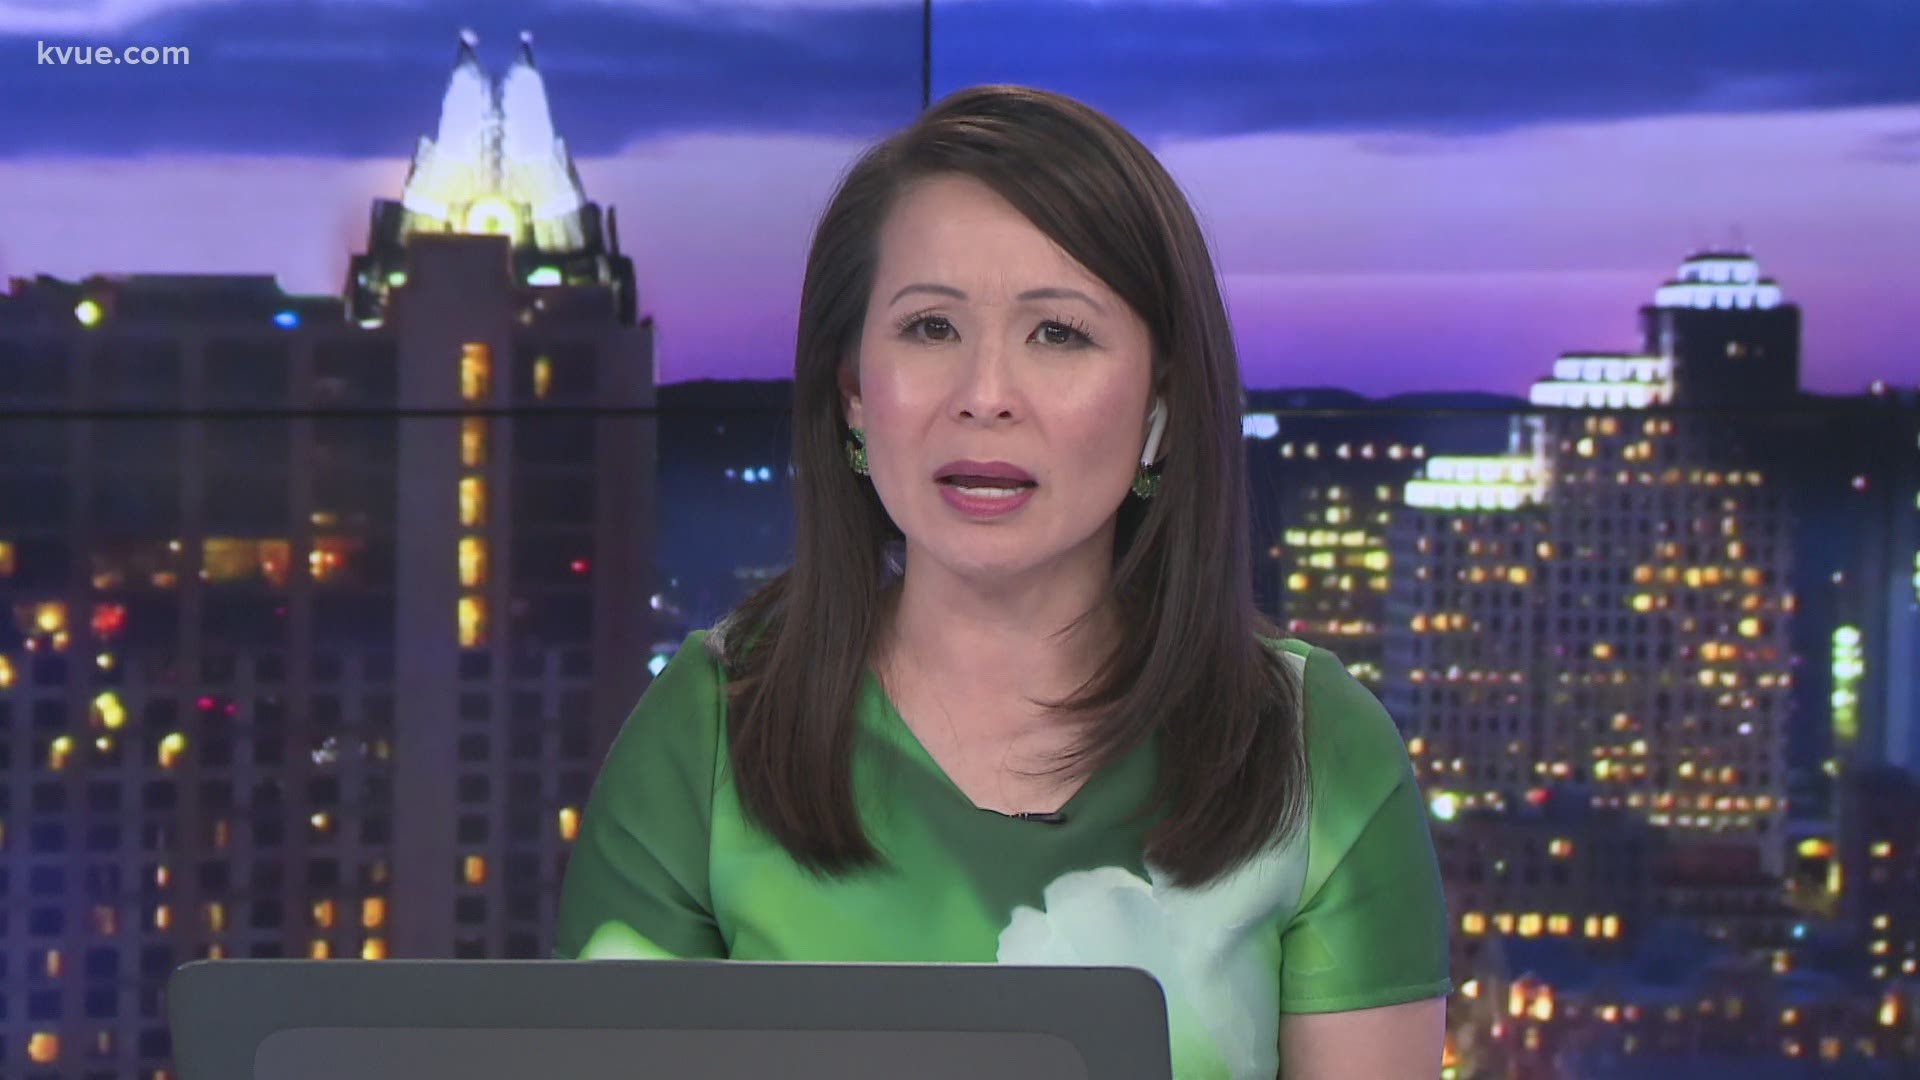 KVUE's Jenni Lee opened up during Sunday's evening newscast about racism she has experienced in her life as well as her fears amid anti-Asian American violence.